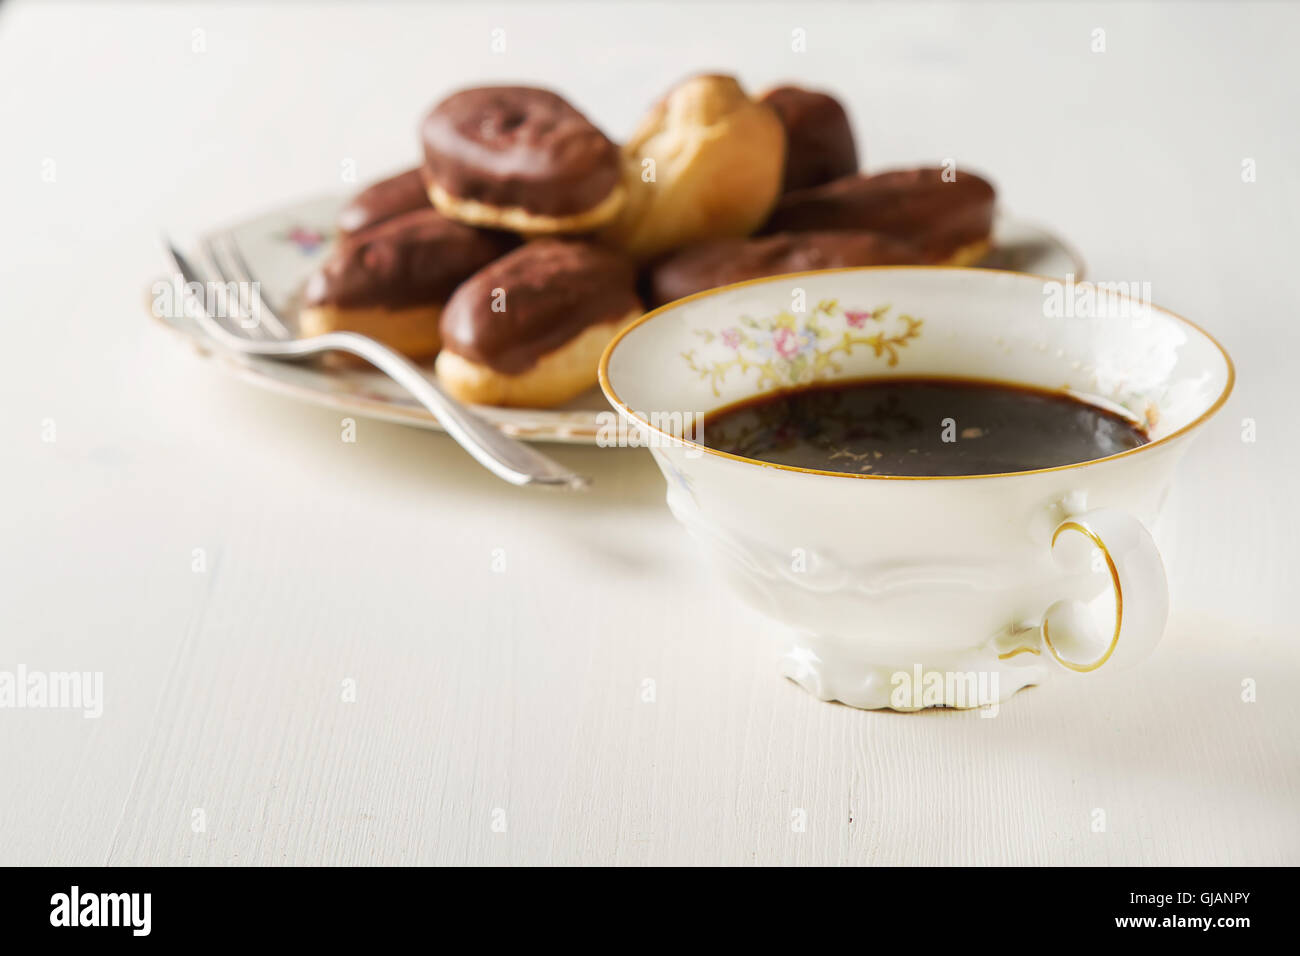 French Chocolate cake, eclairs with a cup of hot black coffee in a vintage crockery, dessert fork. White wooden background Stock Photo